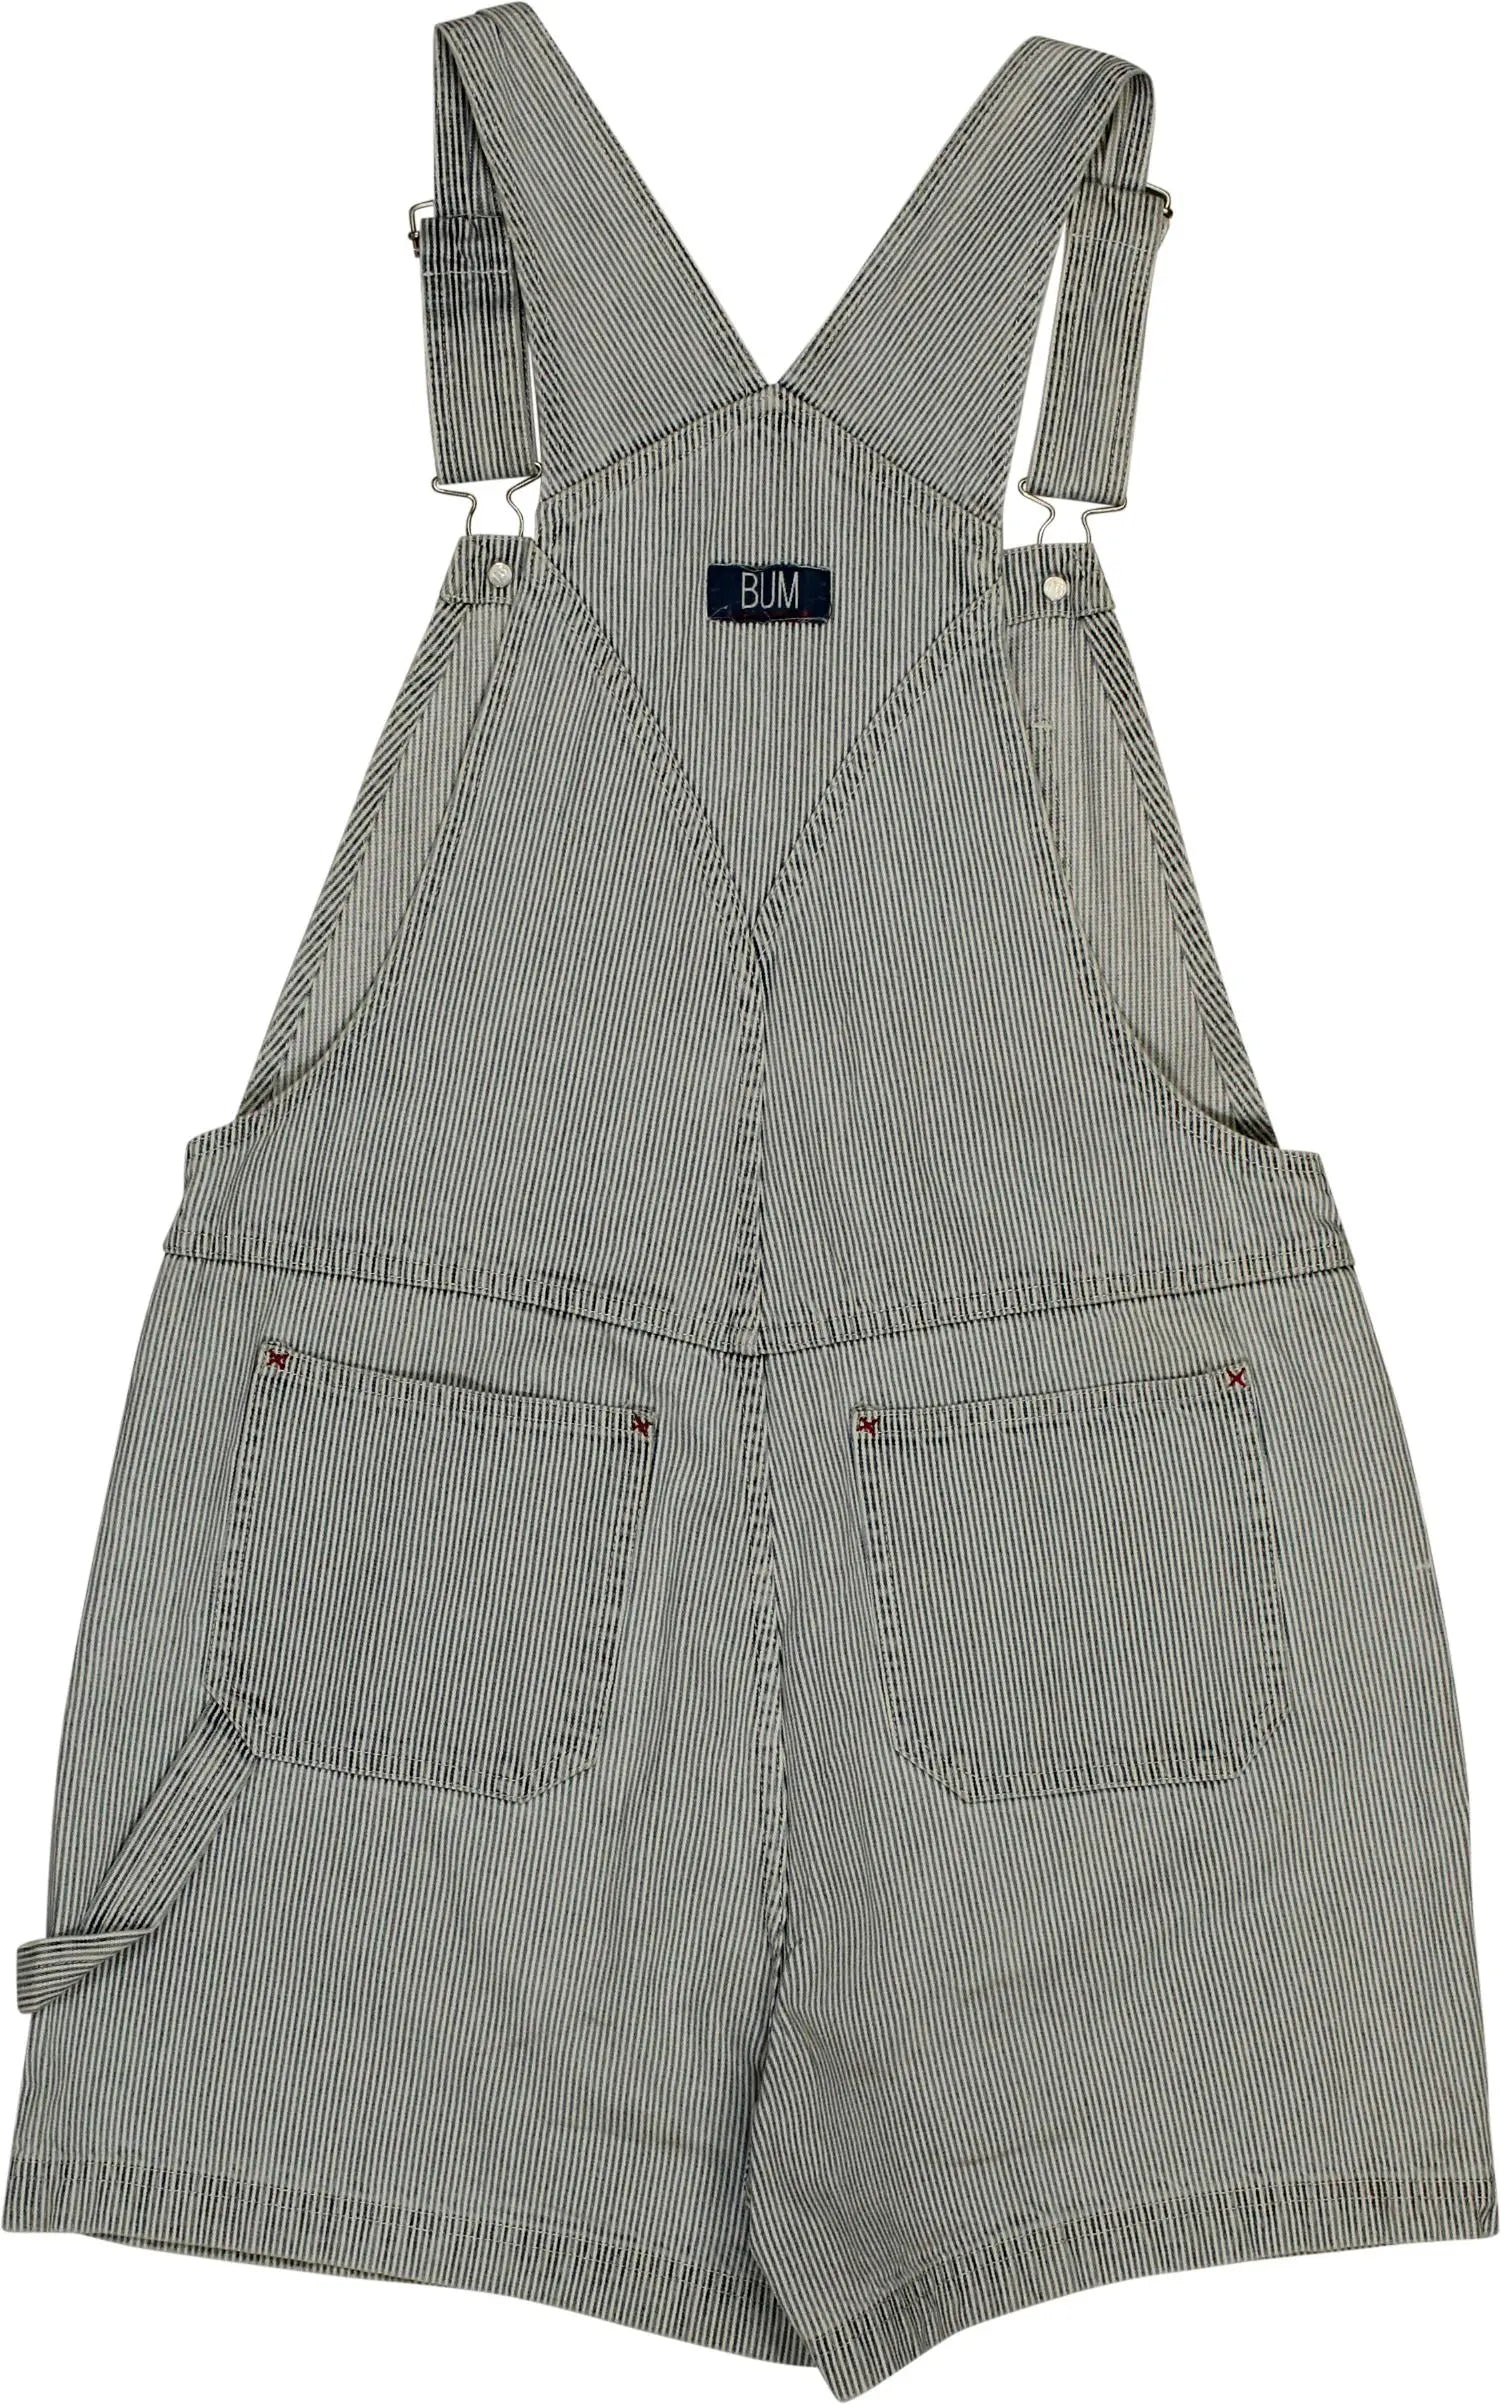 B.U.M. Equipment - 90s Striped Dungaree- ThriftTale.com - Vintage and second handclothing